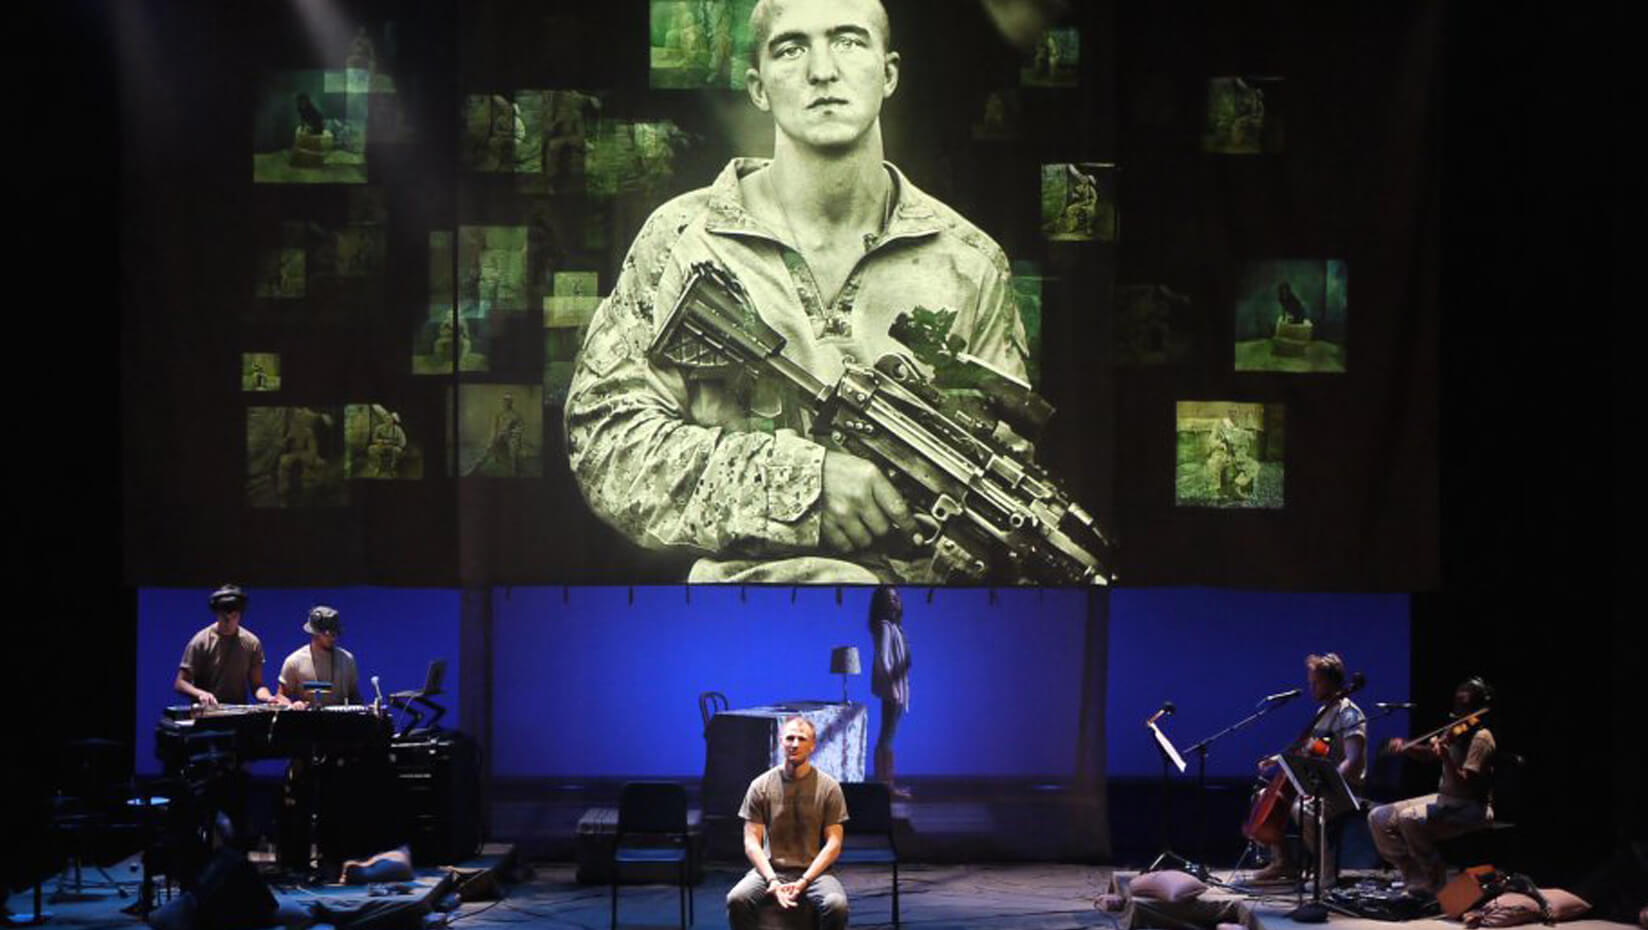 Man on stage with the image of a U.S. soldier behind him